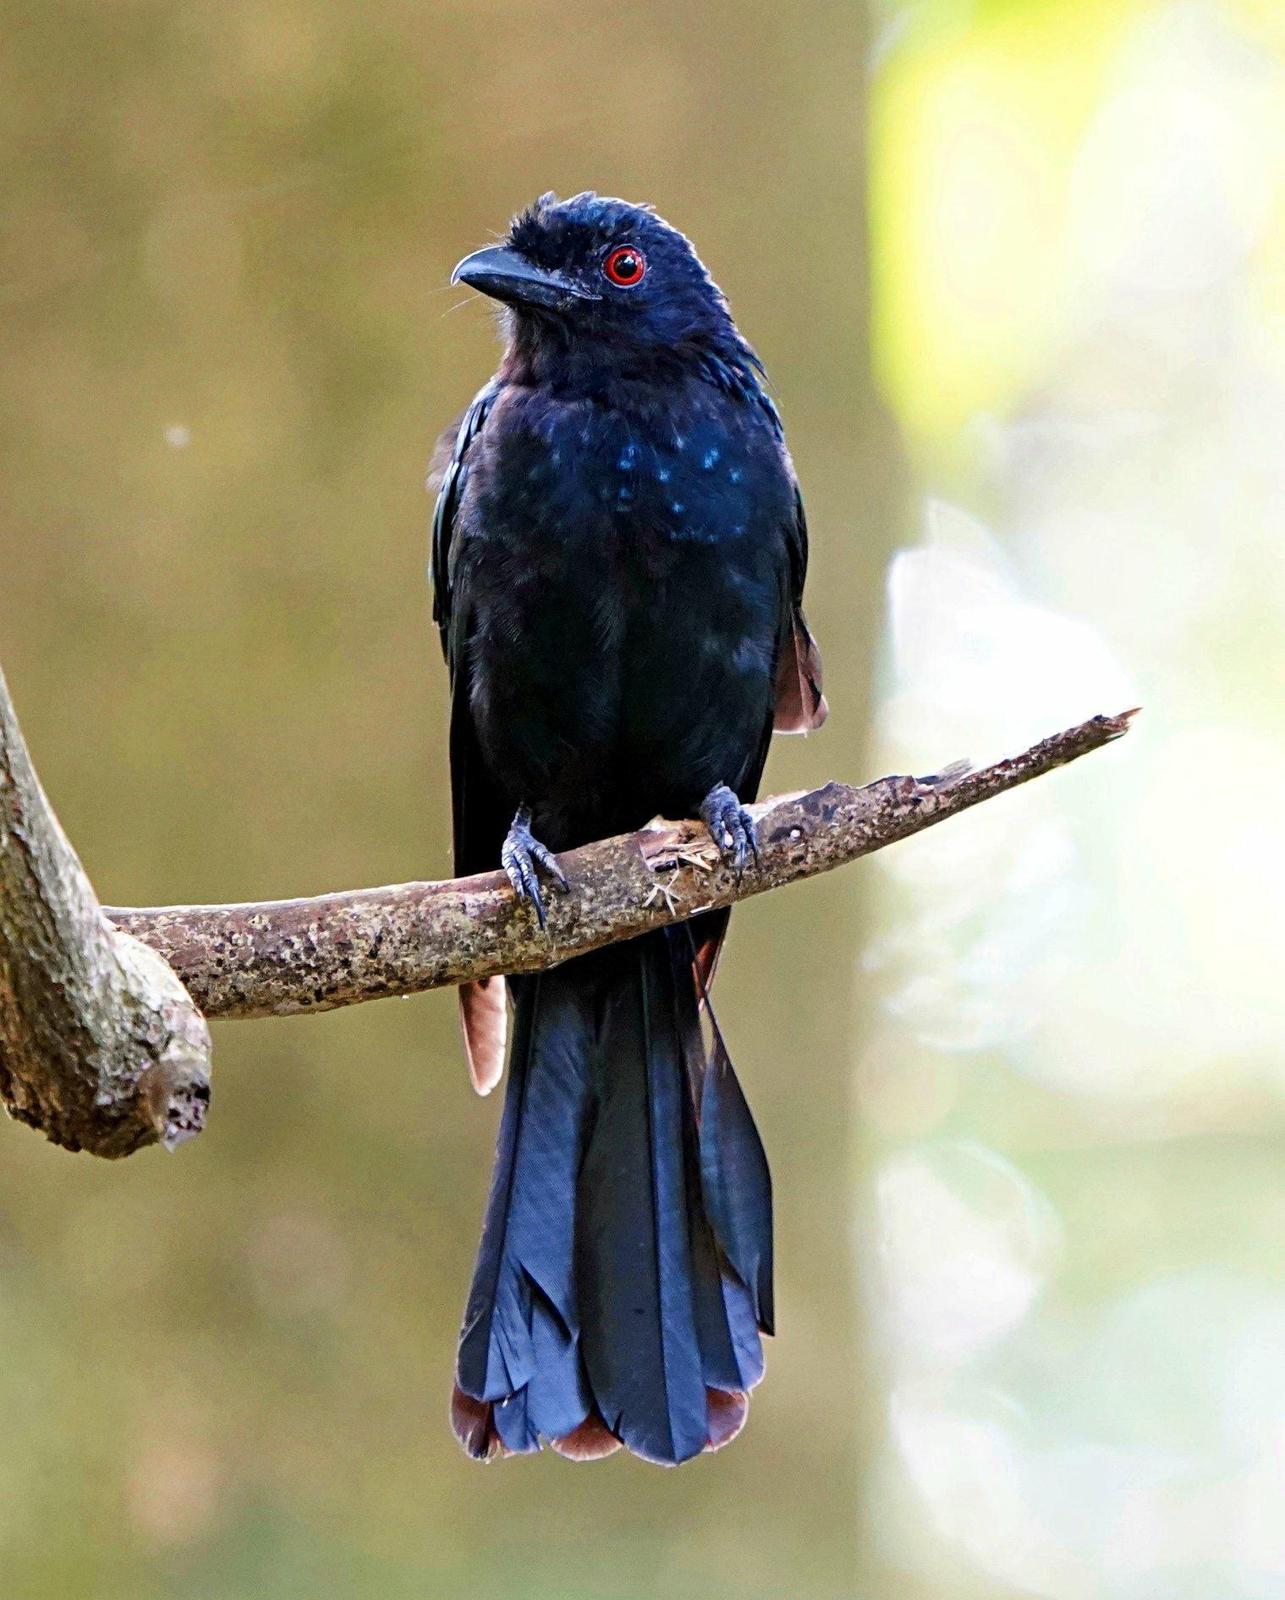 Greater Racket-tailed Drongo Photo by Steven Cheong